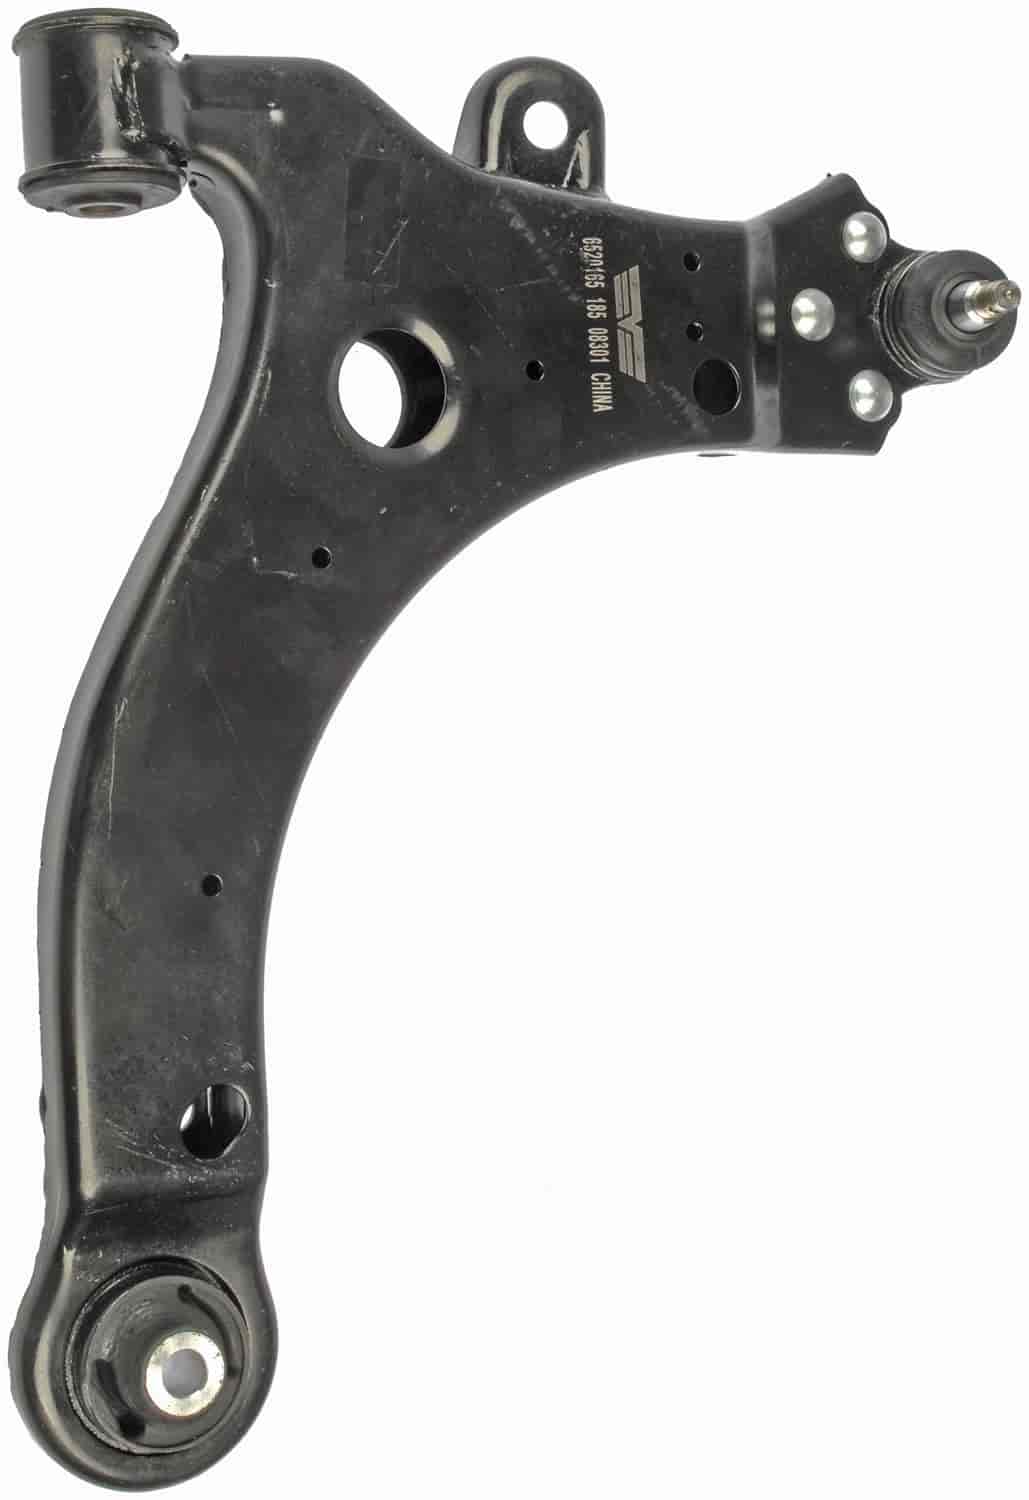 Lower Control Arm 2005-2009 Buick, 2000-2016 Chevy, 2004-2008 Pontiac - Front Left